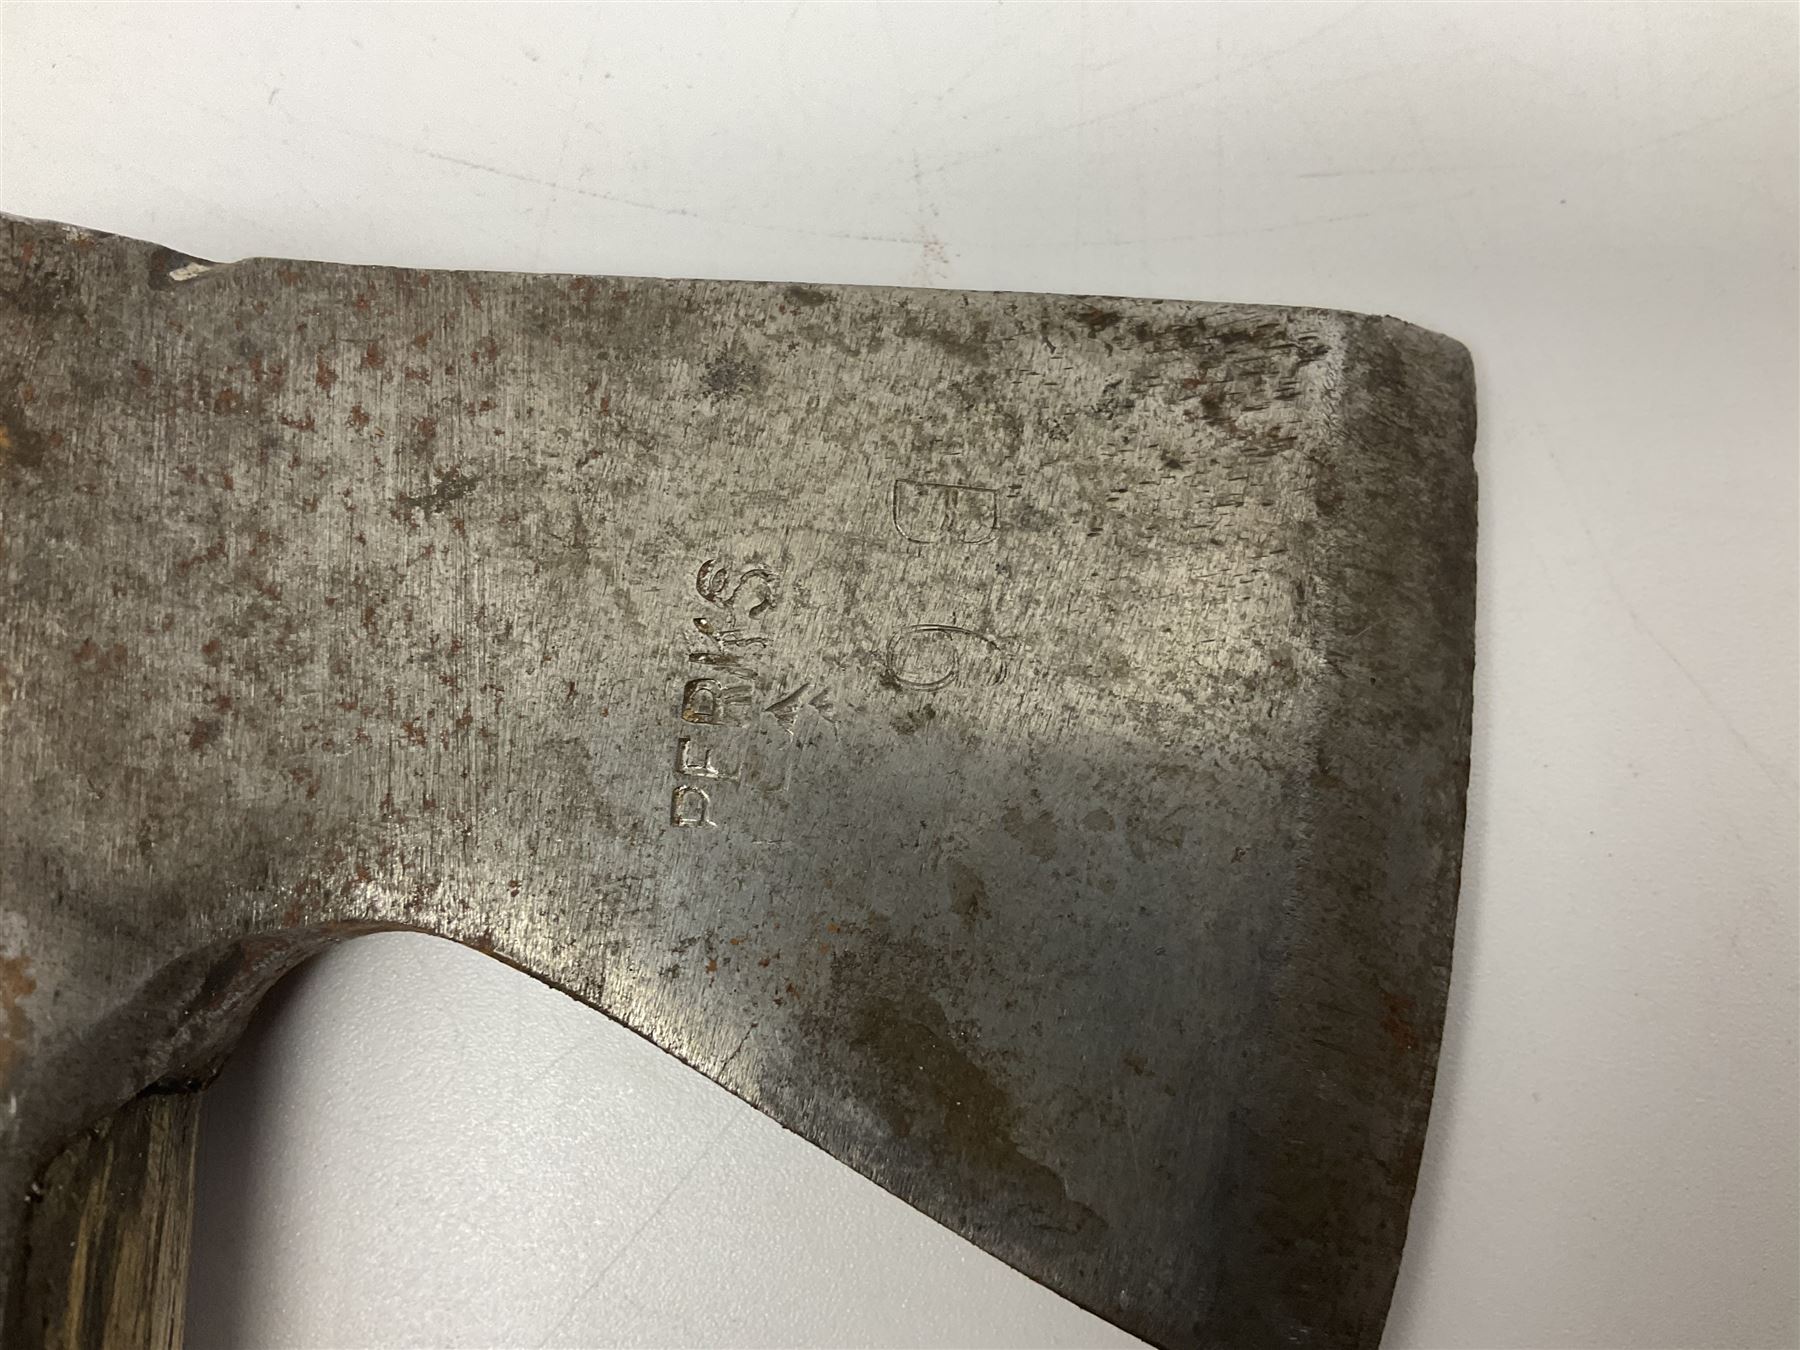 Post-War military type fireman's axe impressed 'PERKS 1953/54' with additional indistinct mark proba - Image 12 of 19